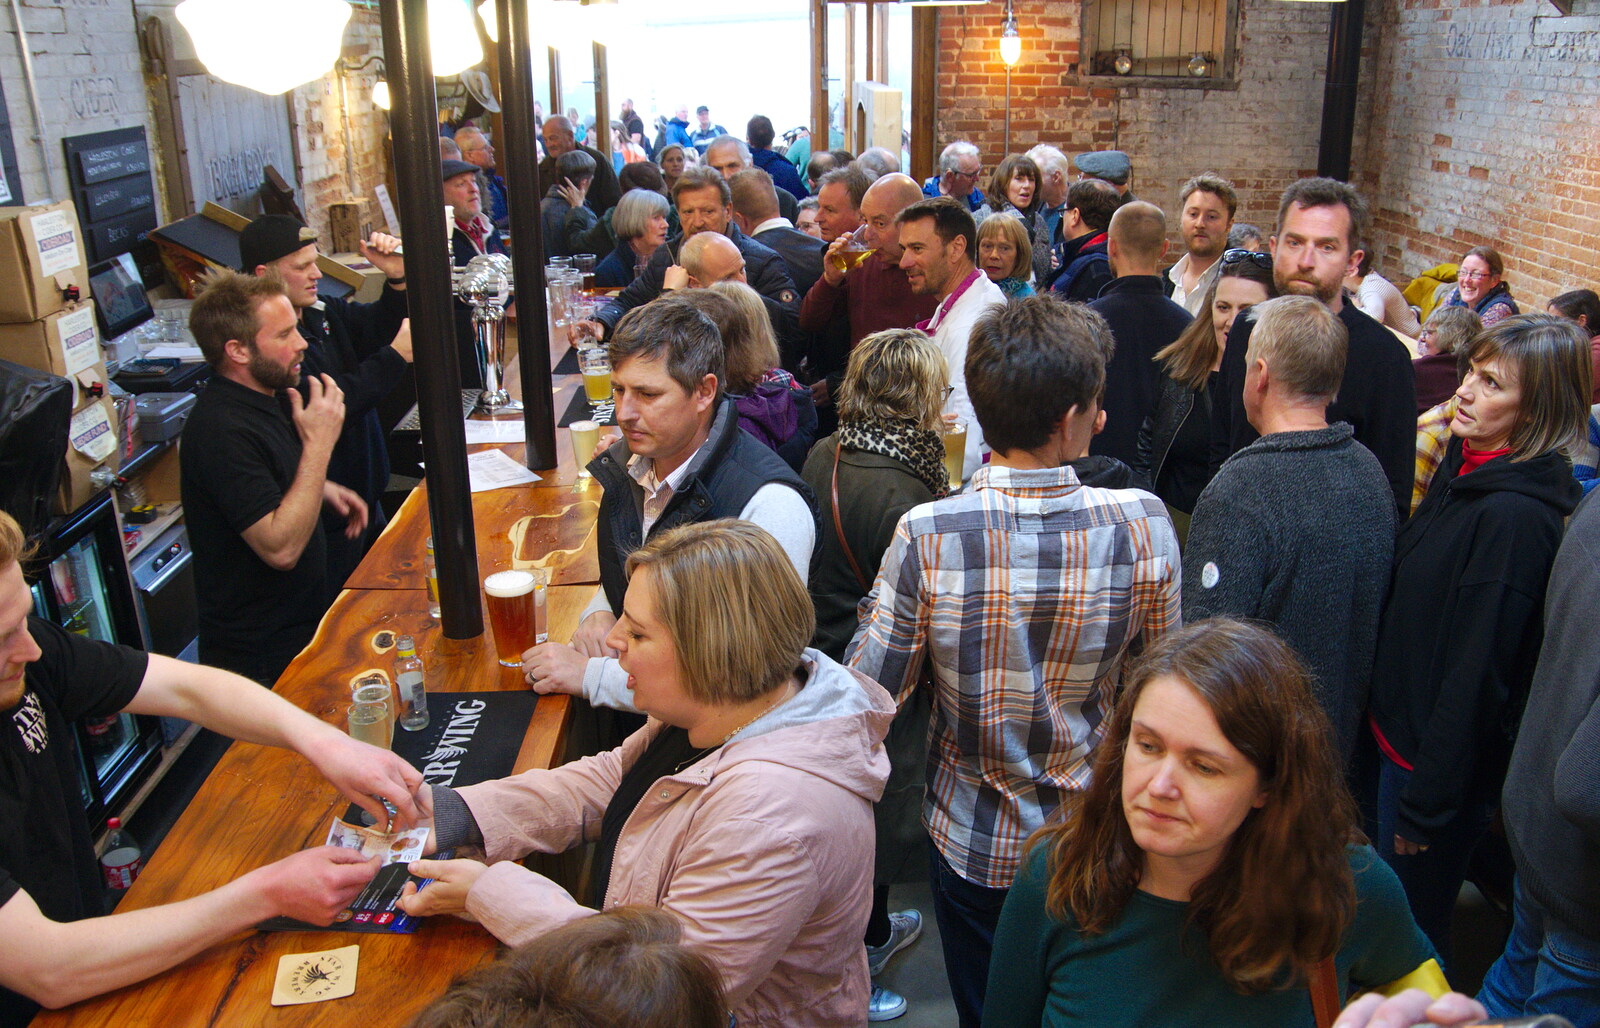 Crowded scenes in the tap room from The Opening of Star Wing Brewery's Tap Room, Redgrave, Suffolk - 4th May 2019